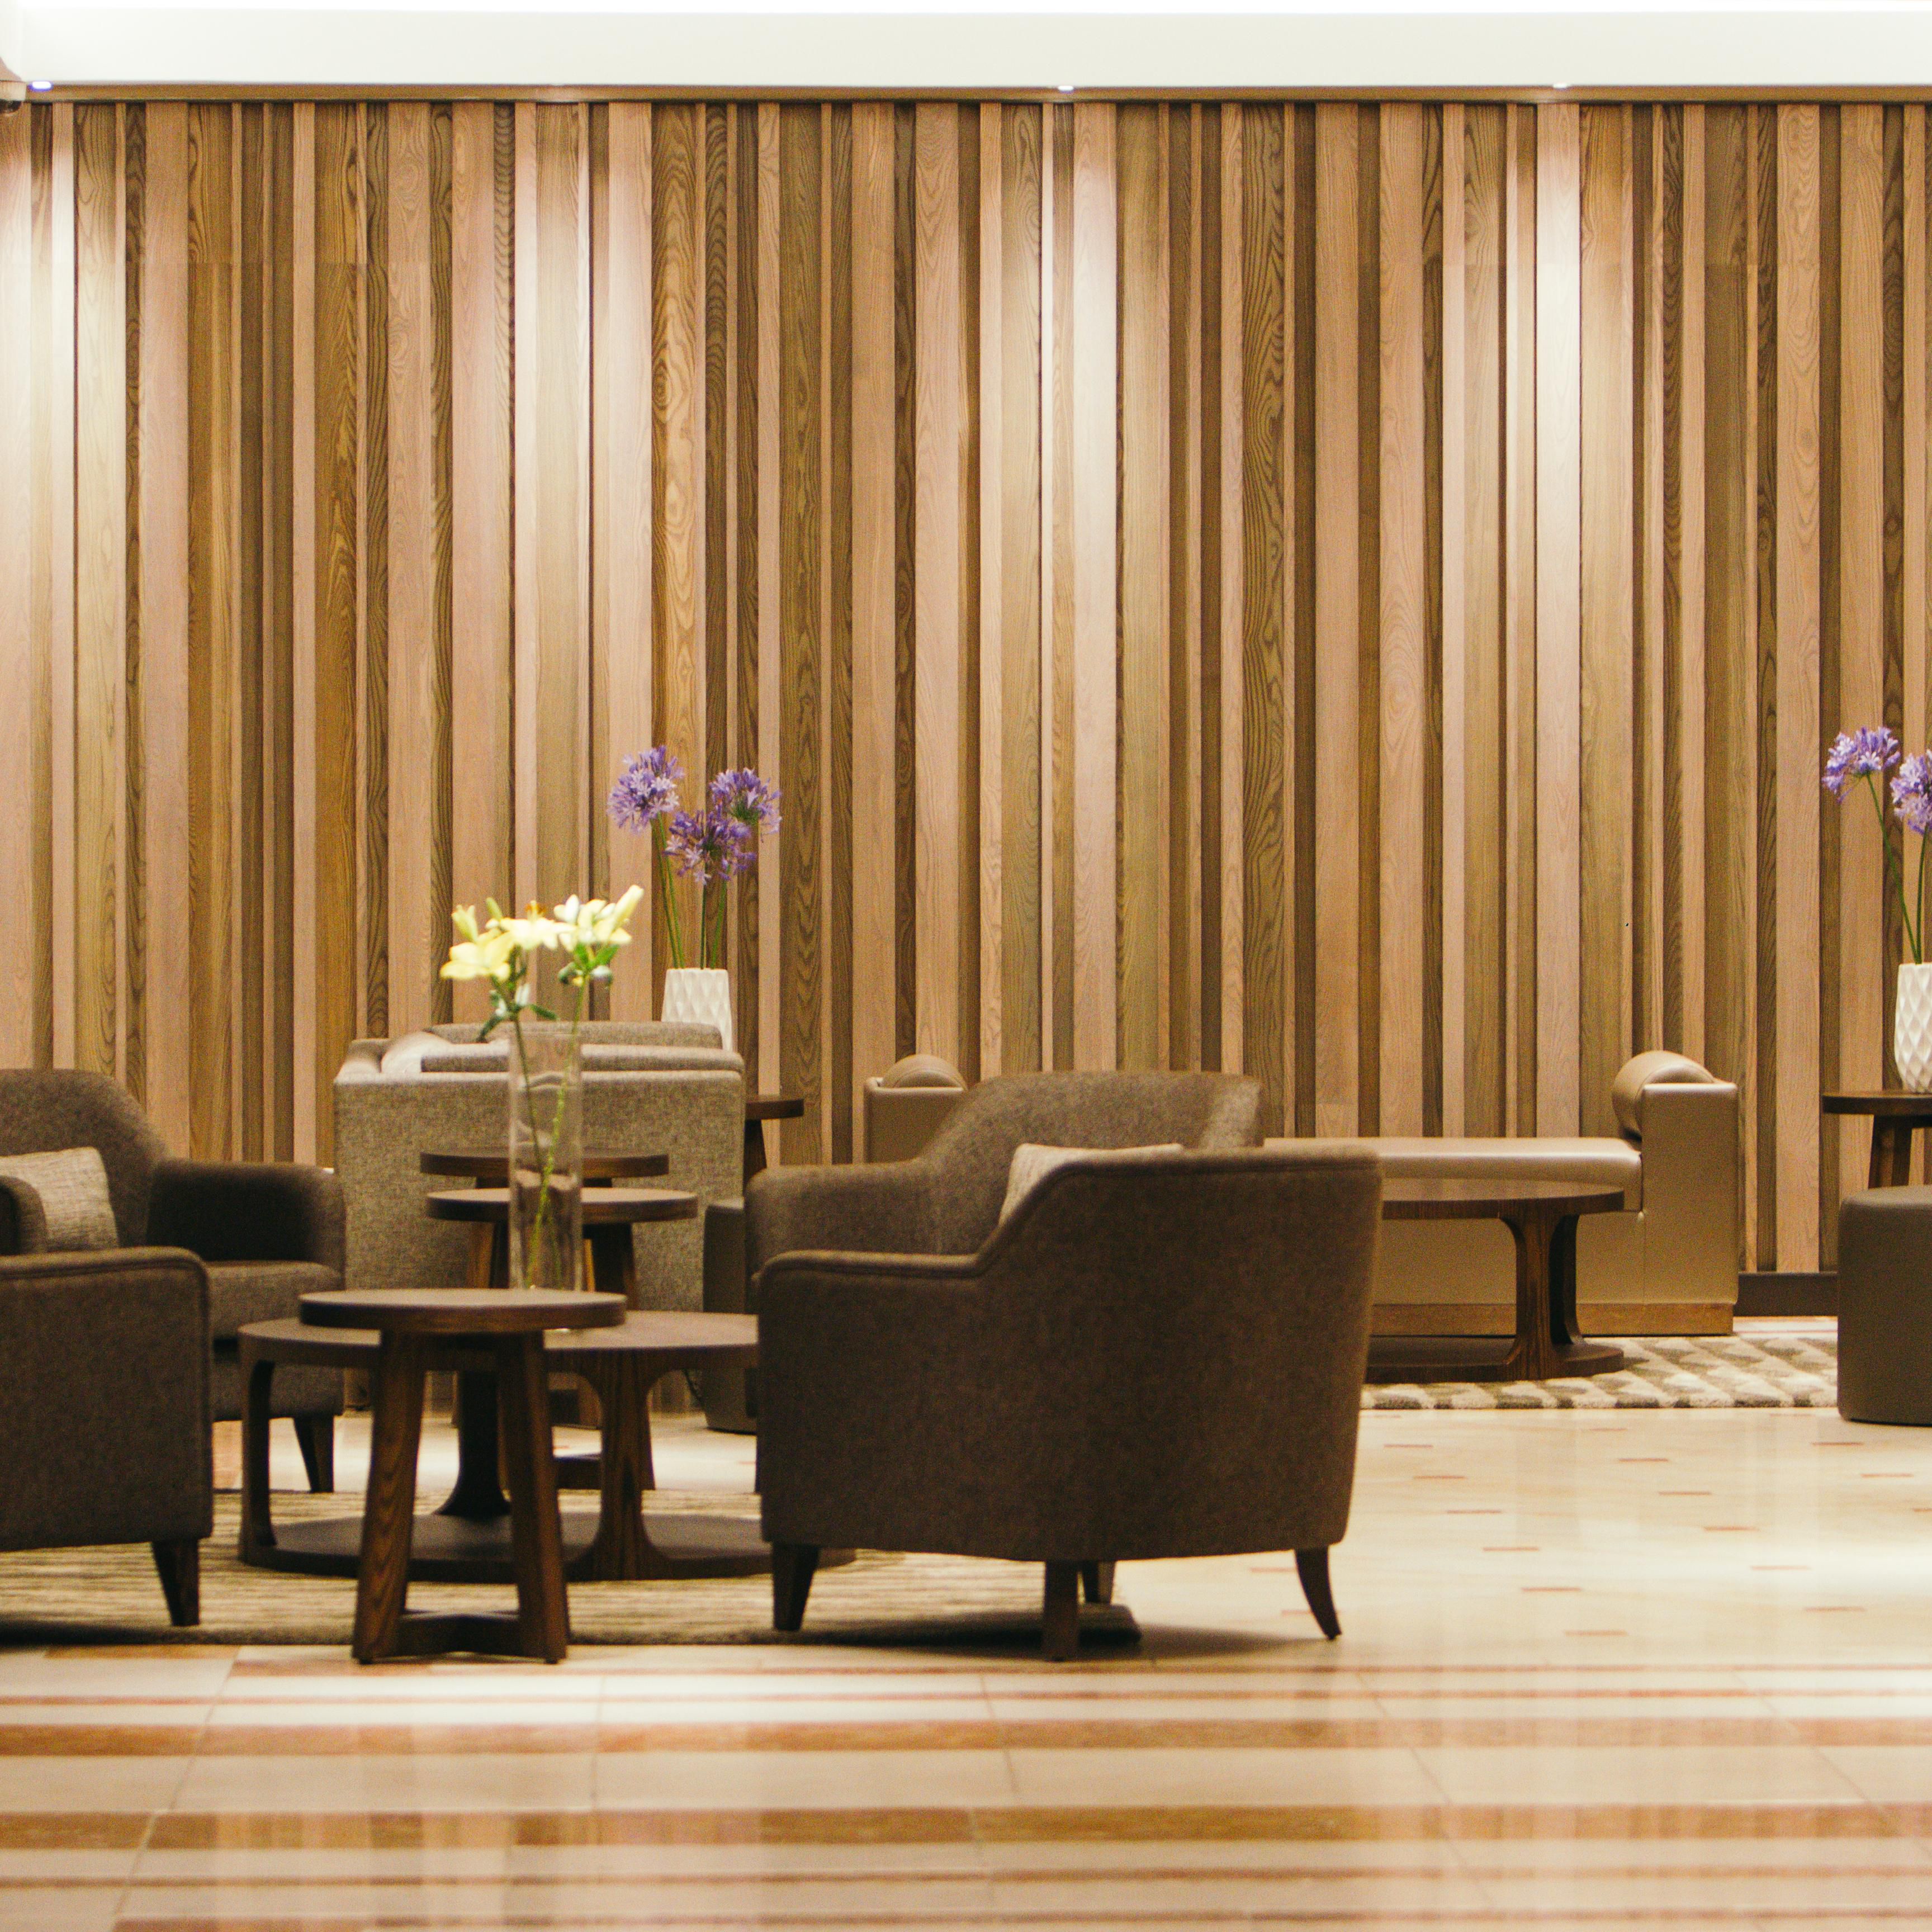 See the beautiful wood craftmanship throught our new lobby.